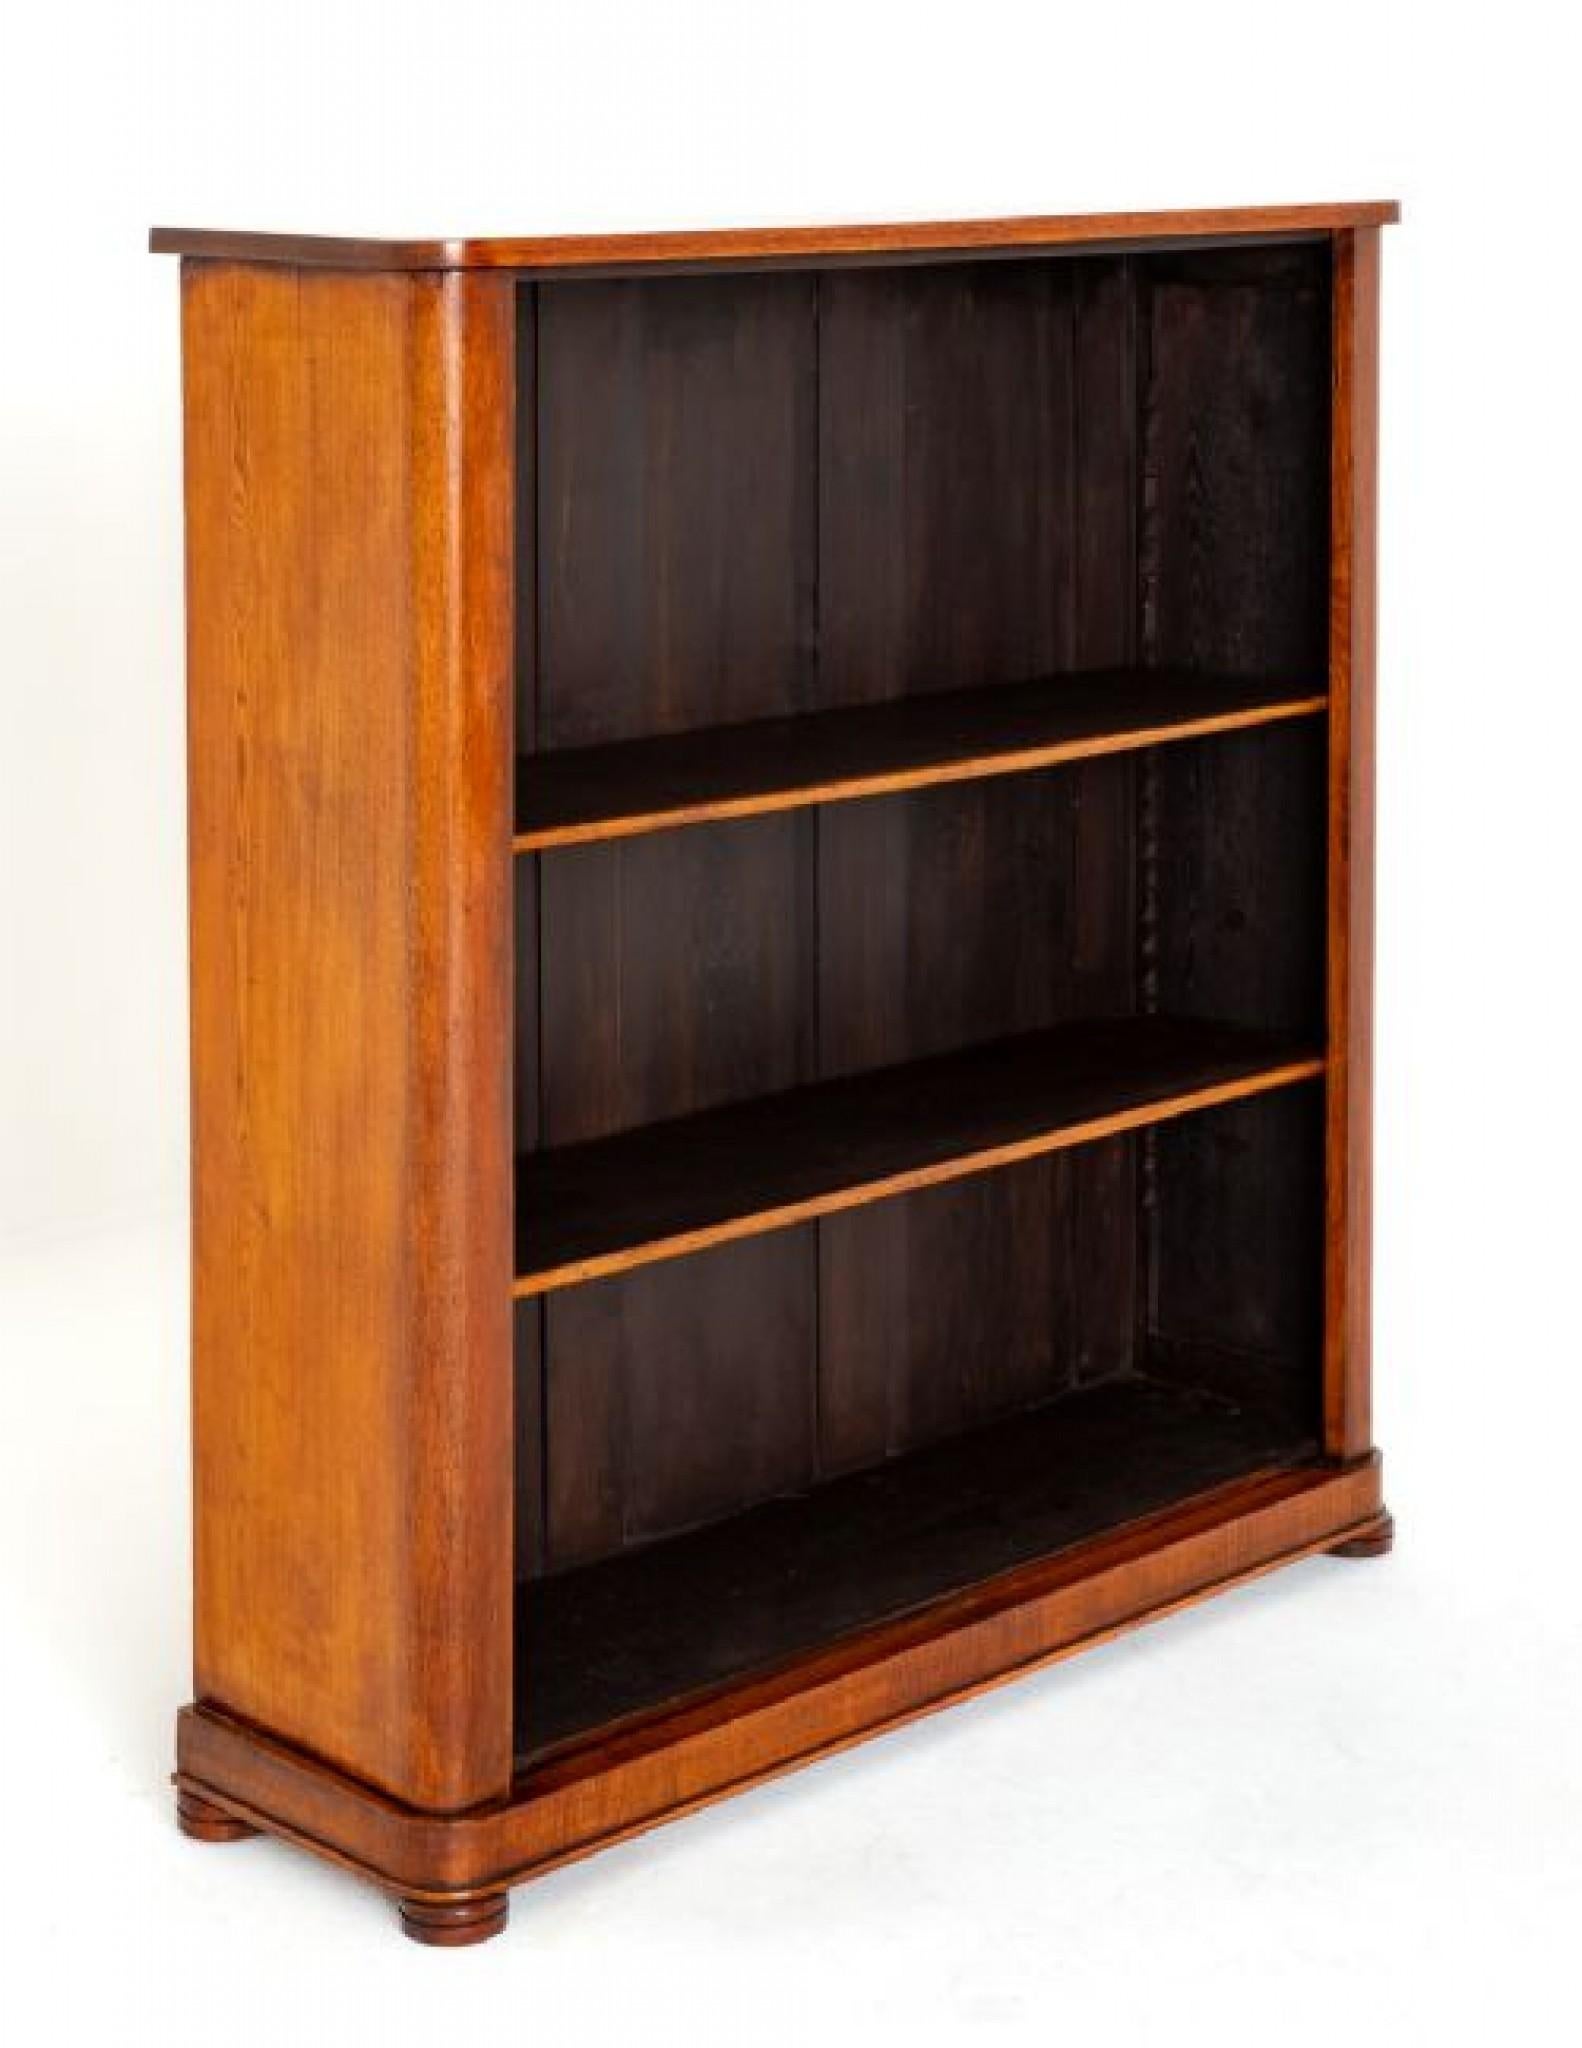 Victorian Blonde Oak Open Bookcase.
This Open Bookcase Stands Upon Turned Feet and a Plinth Base.
The Bookcase Features Rounded Corners.
Circa 1860
Having 2 Fully Adjustable Shelves.
Presented in Good Condition.